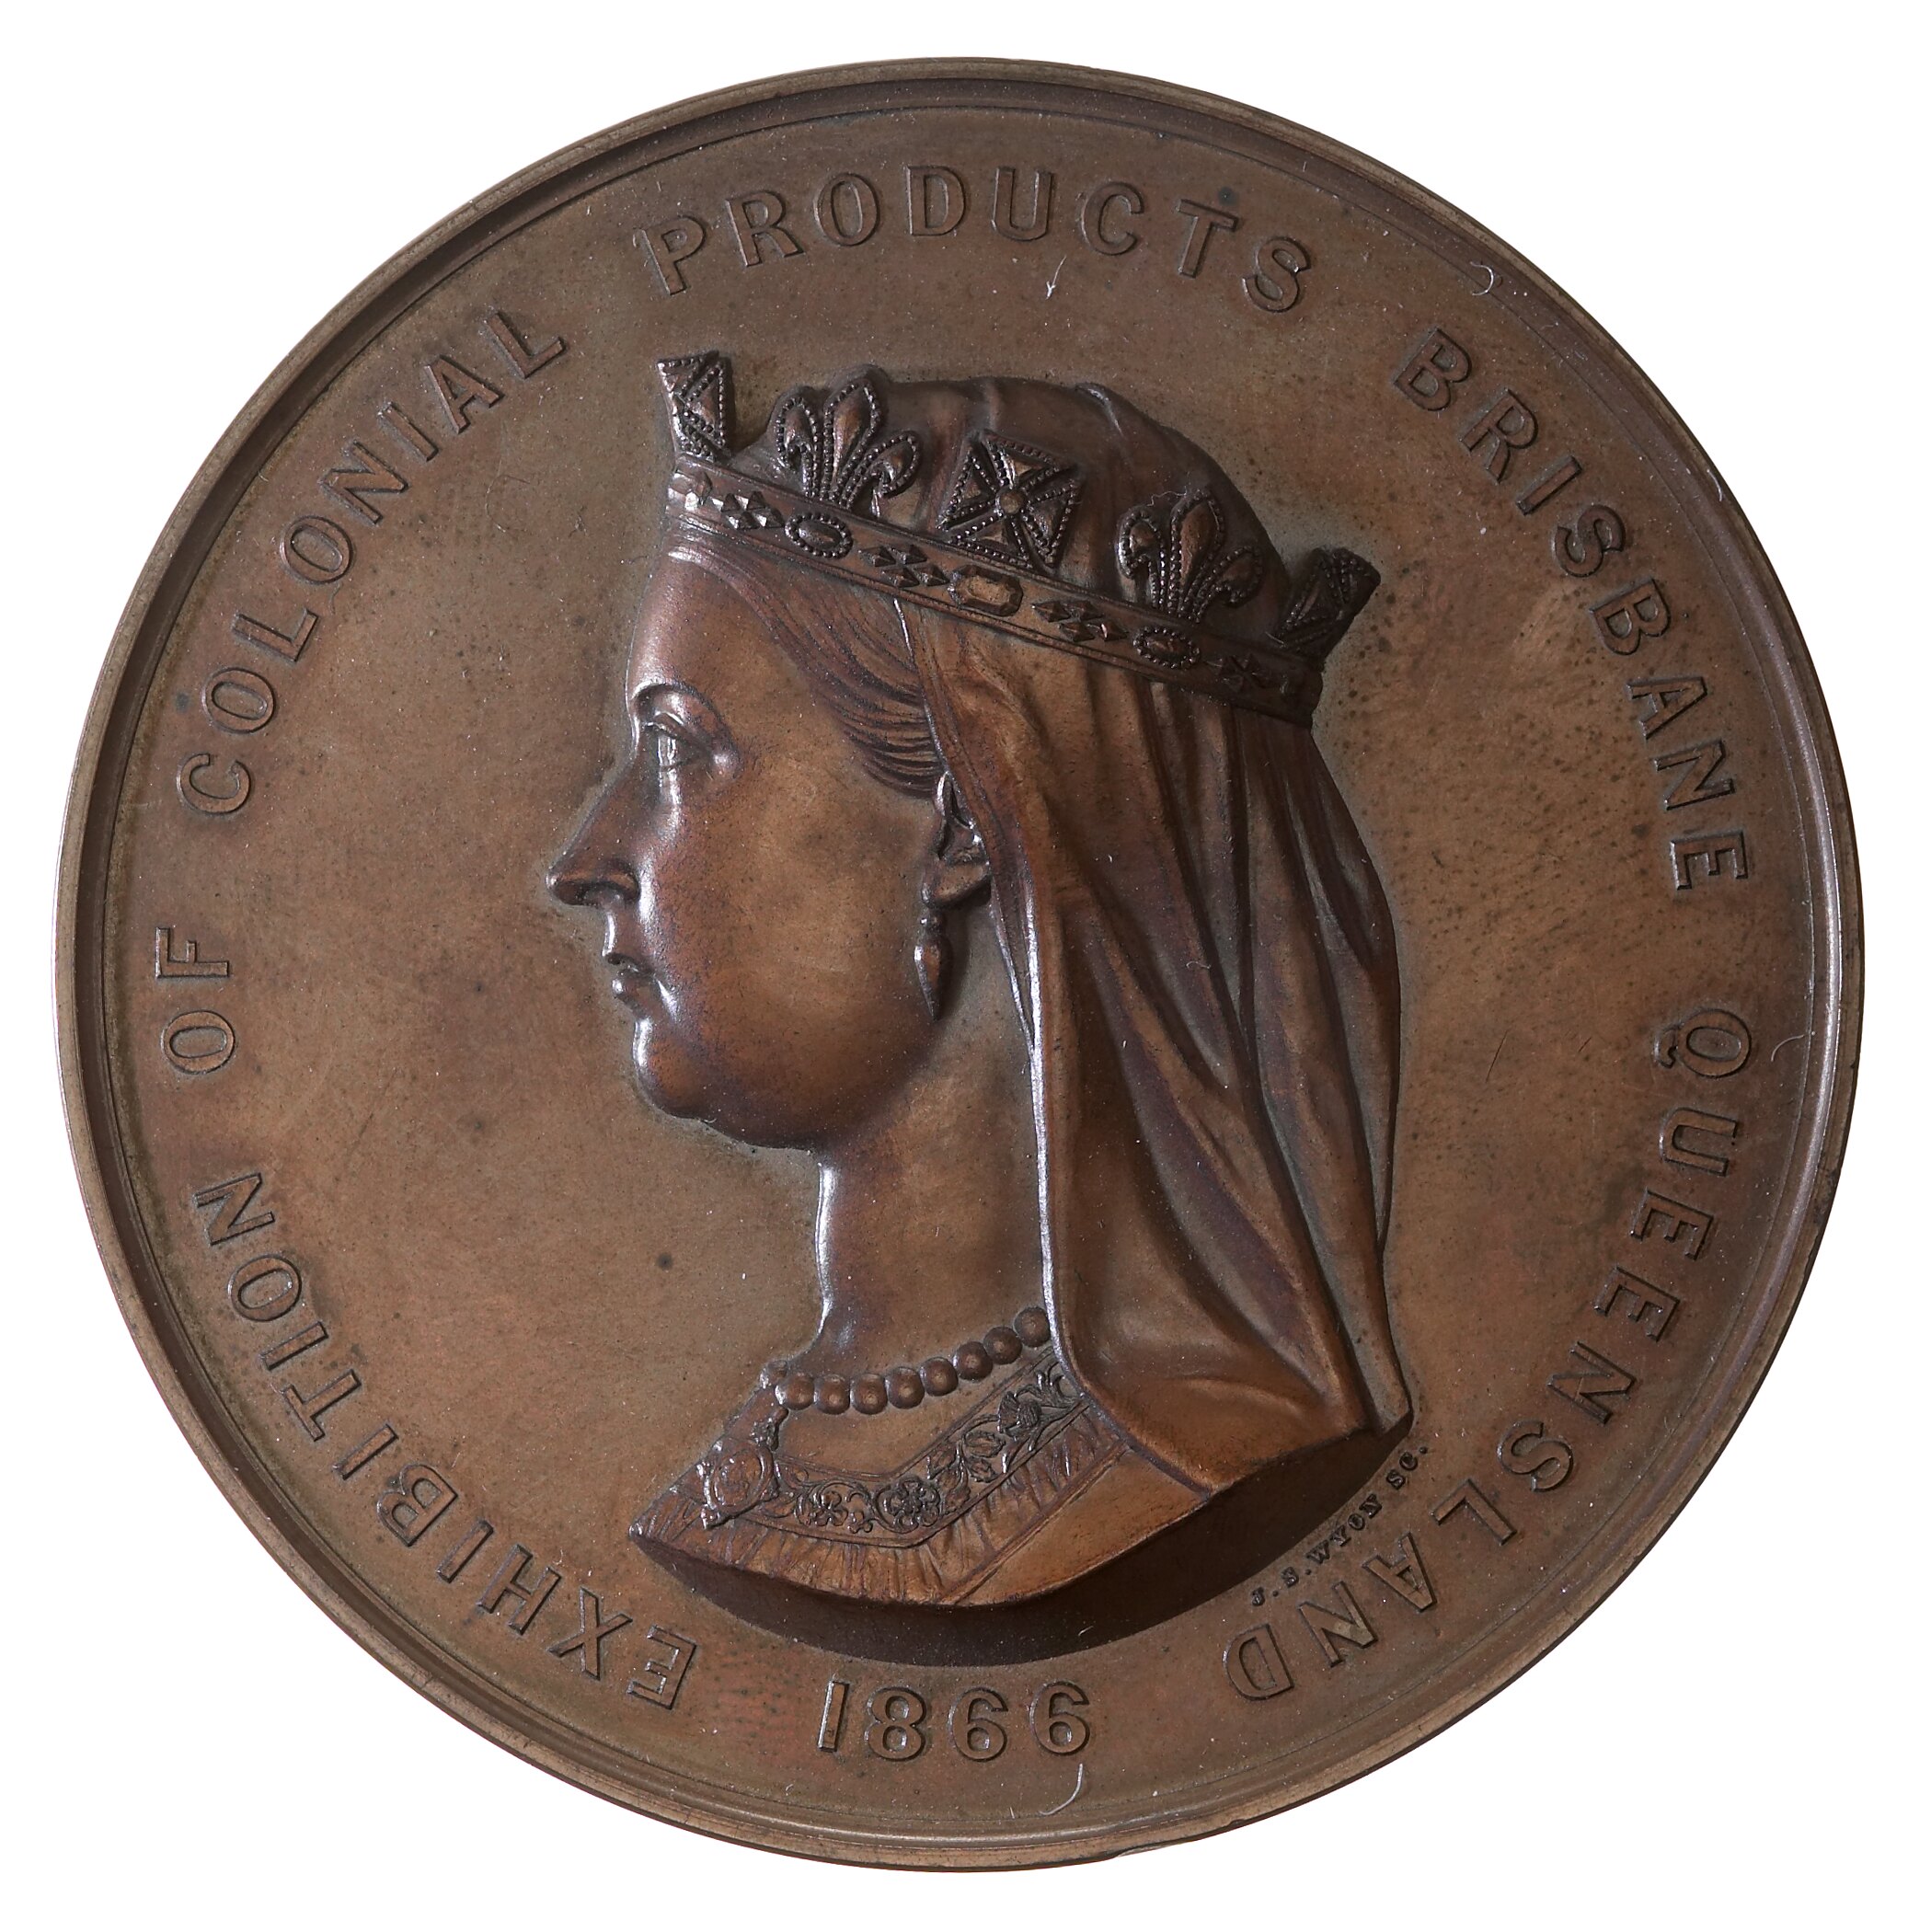 Medal - Brisbane Exhibition of Colonial Products, Queensland, Australia, 1866